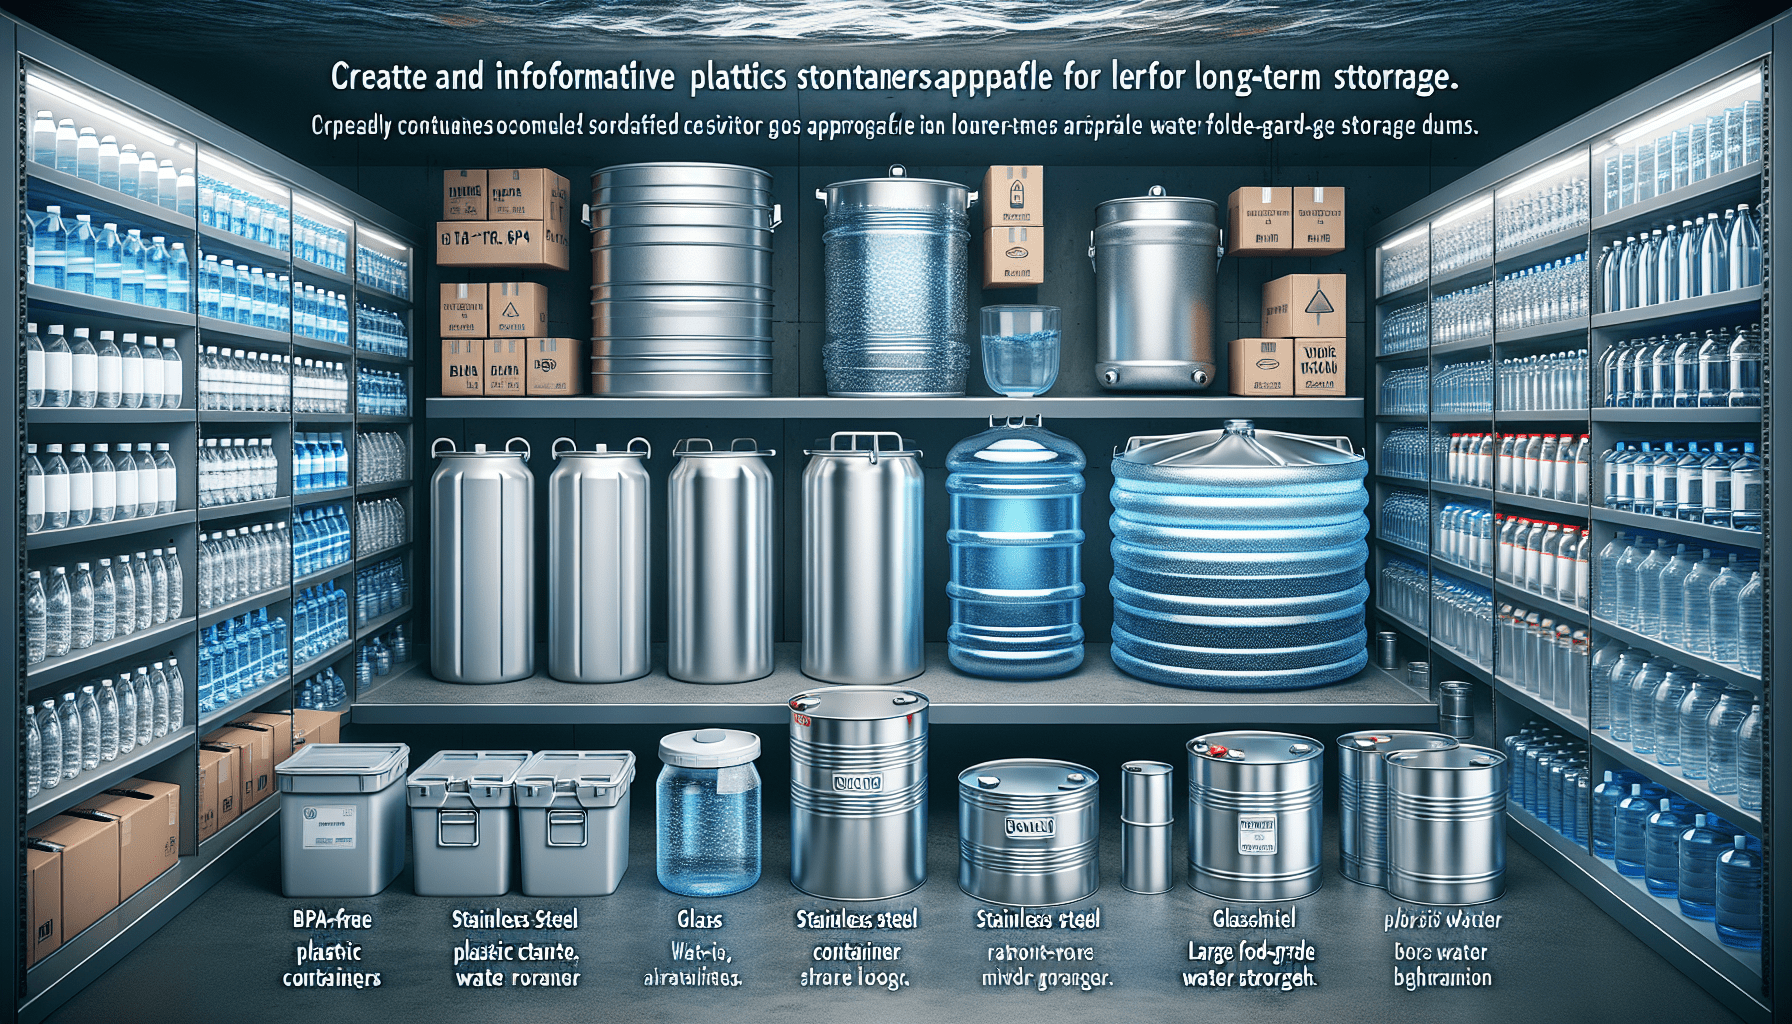 What Are The Best Containers For Storing Water Long-Term?